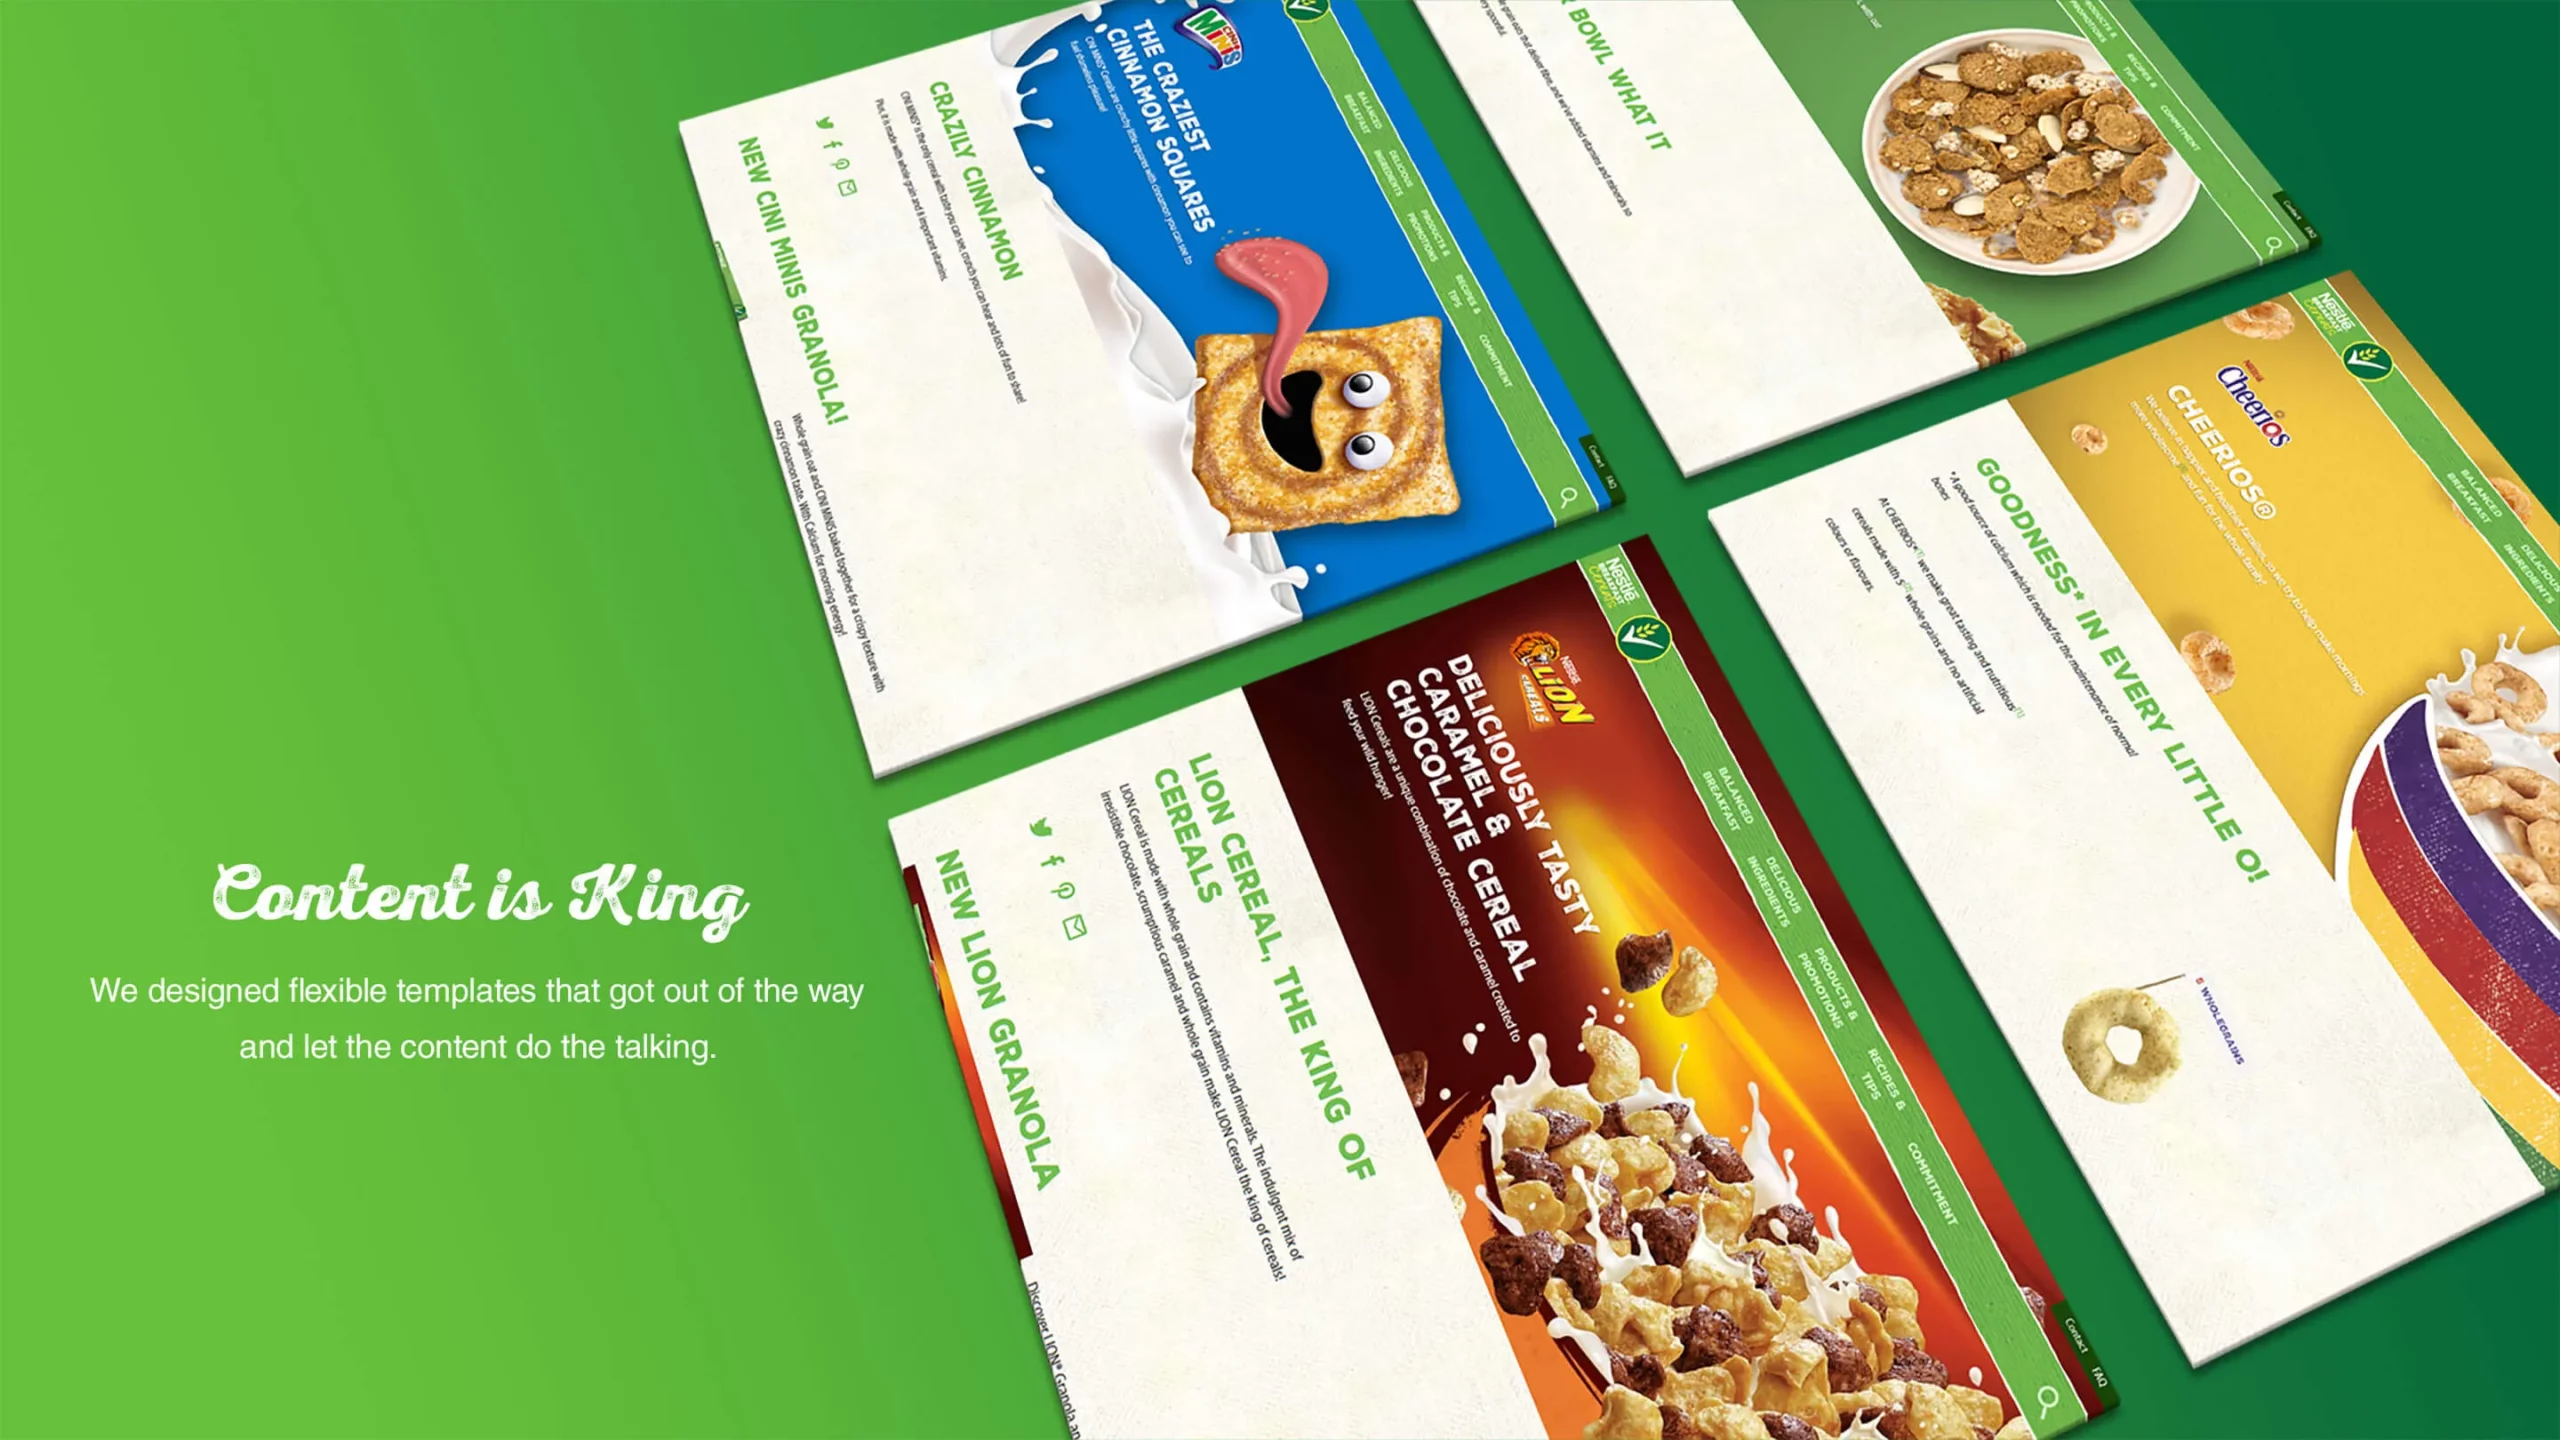 An example of UX and art direction on Nestlé's Global Cereals Website